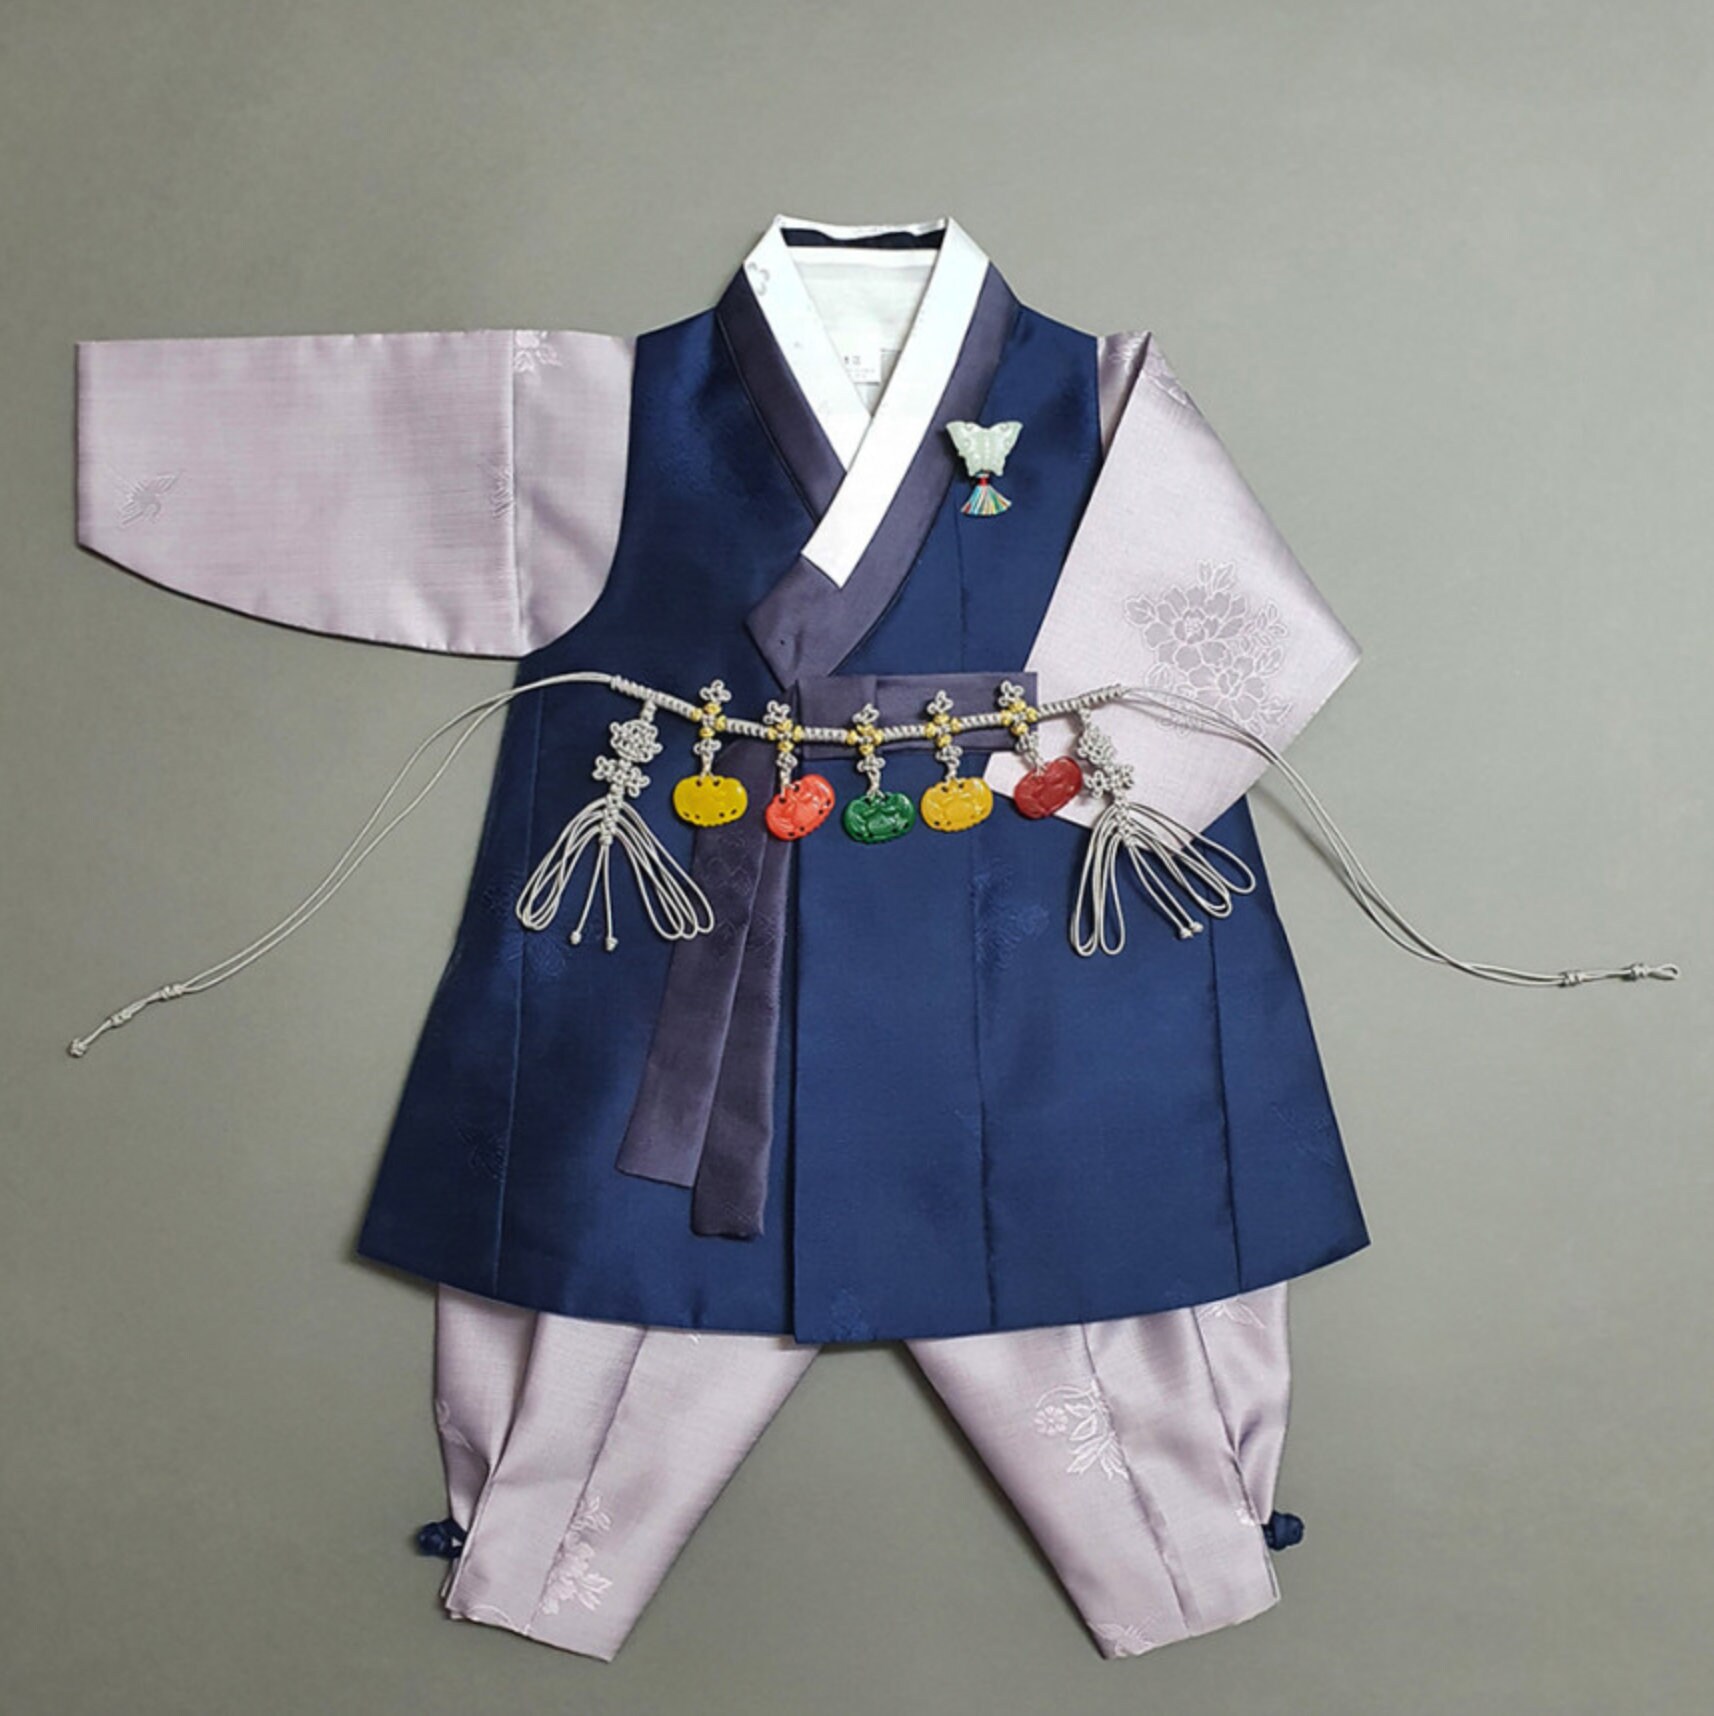 1st birthday traditional dress for baby boy